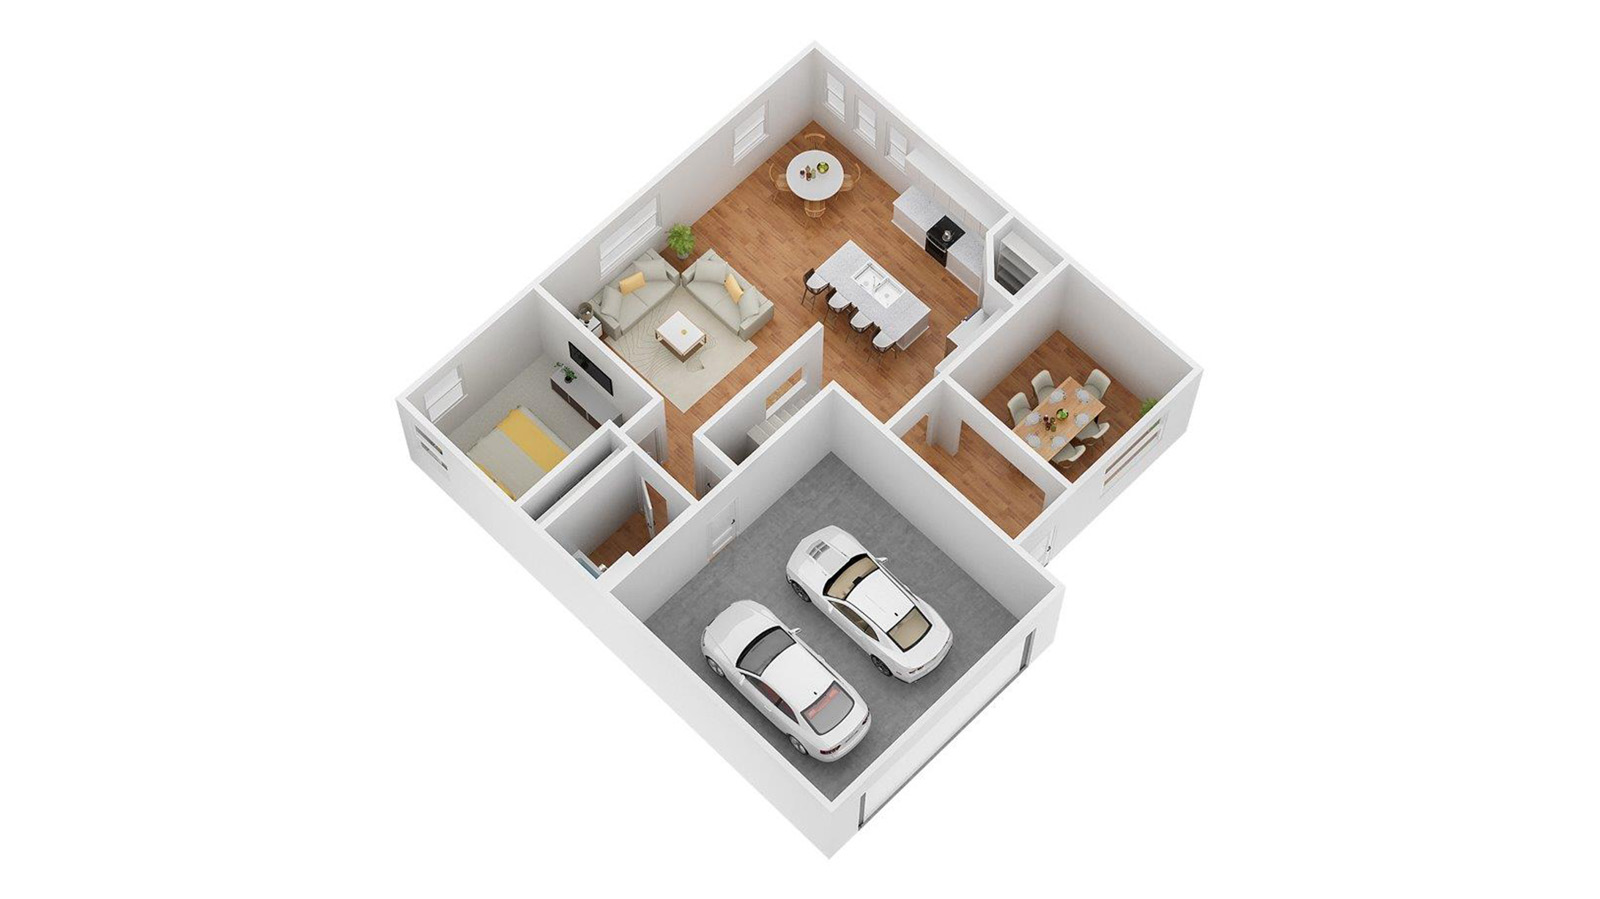 3D Floorplan with furniture located throughout the home